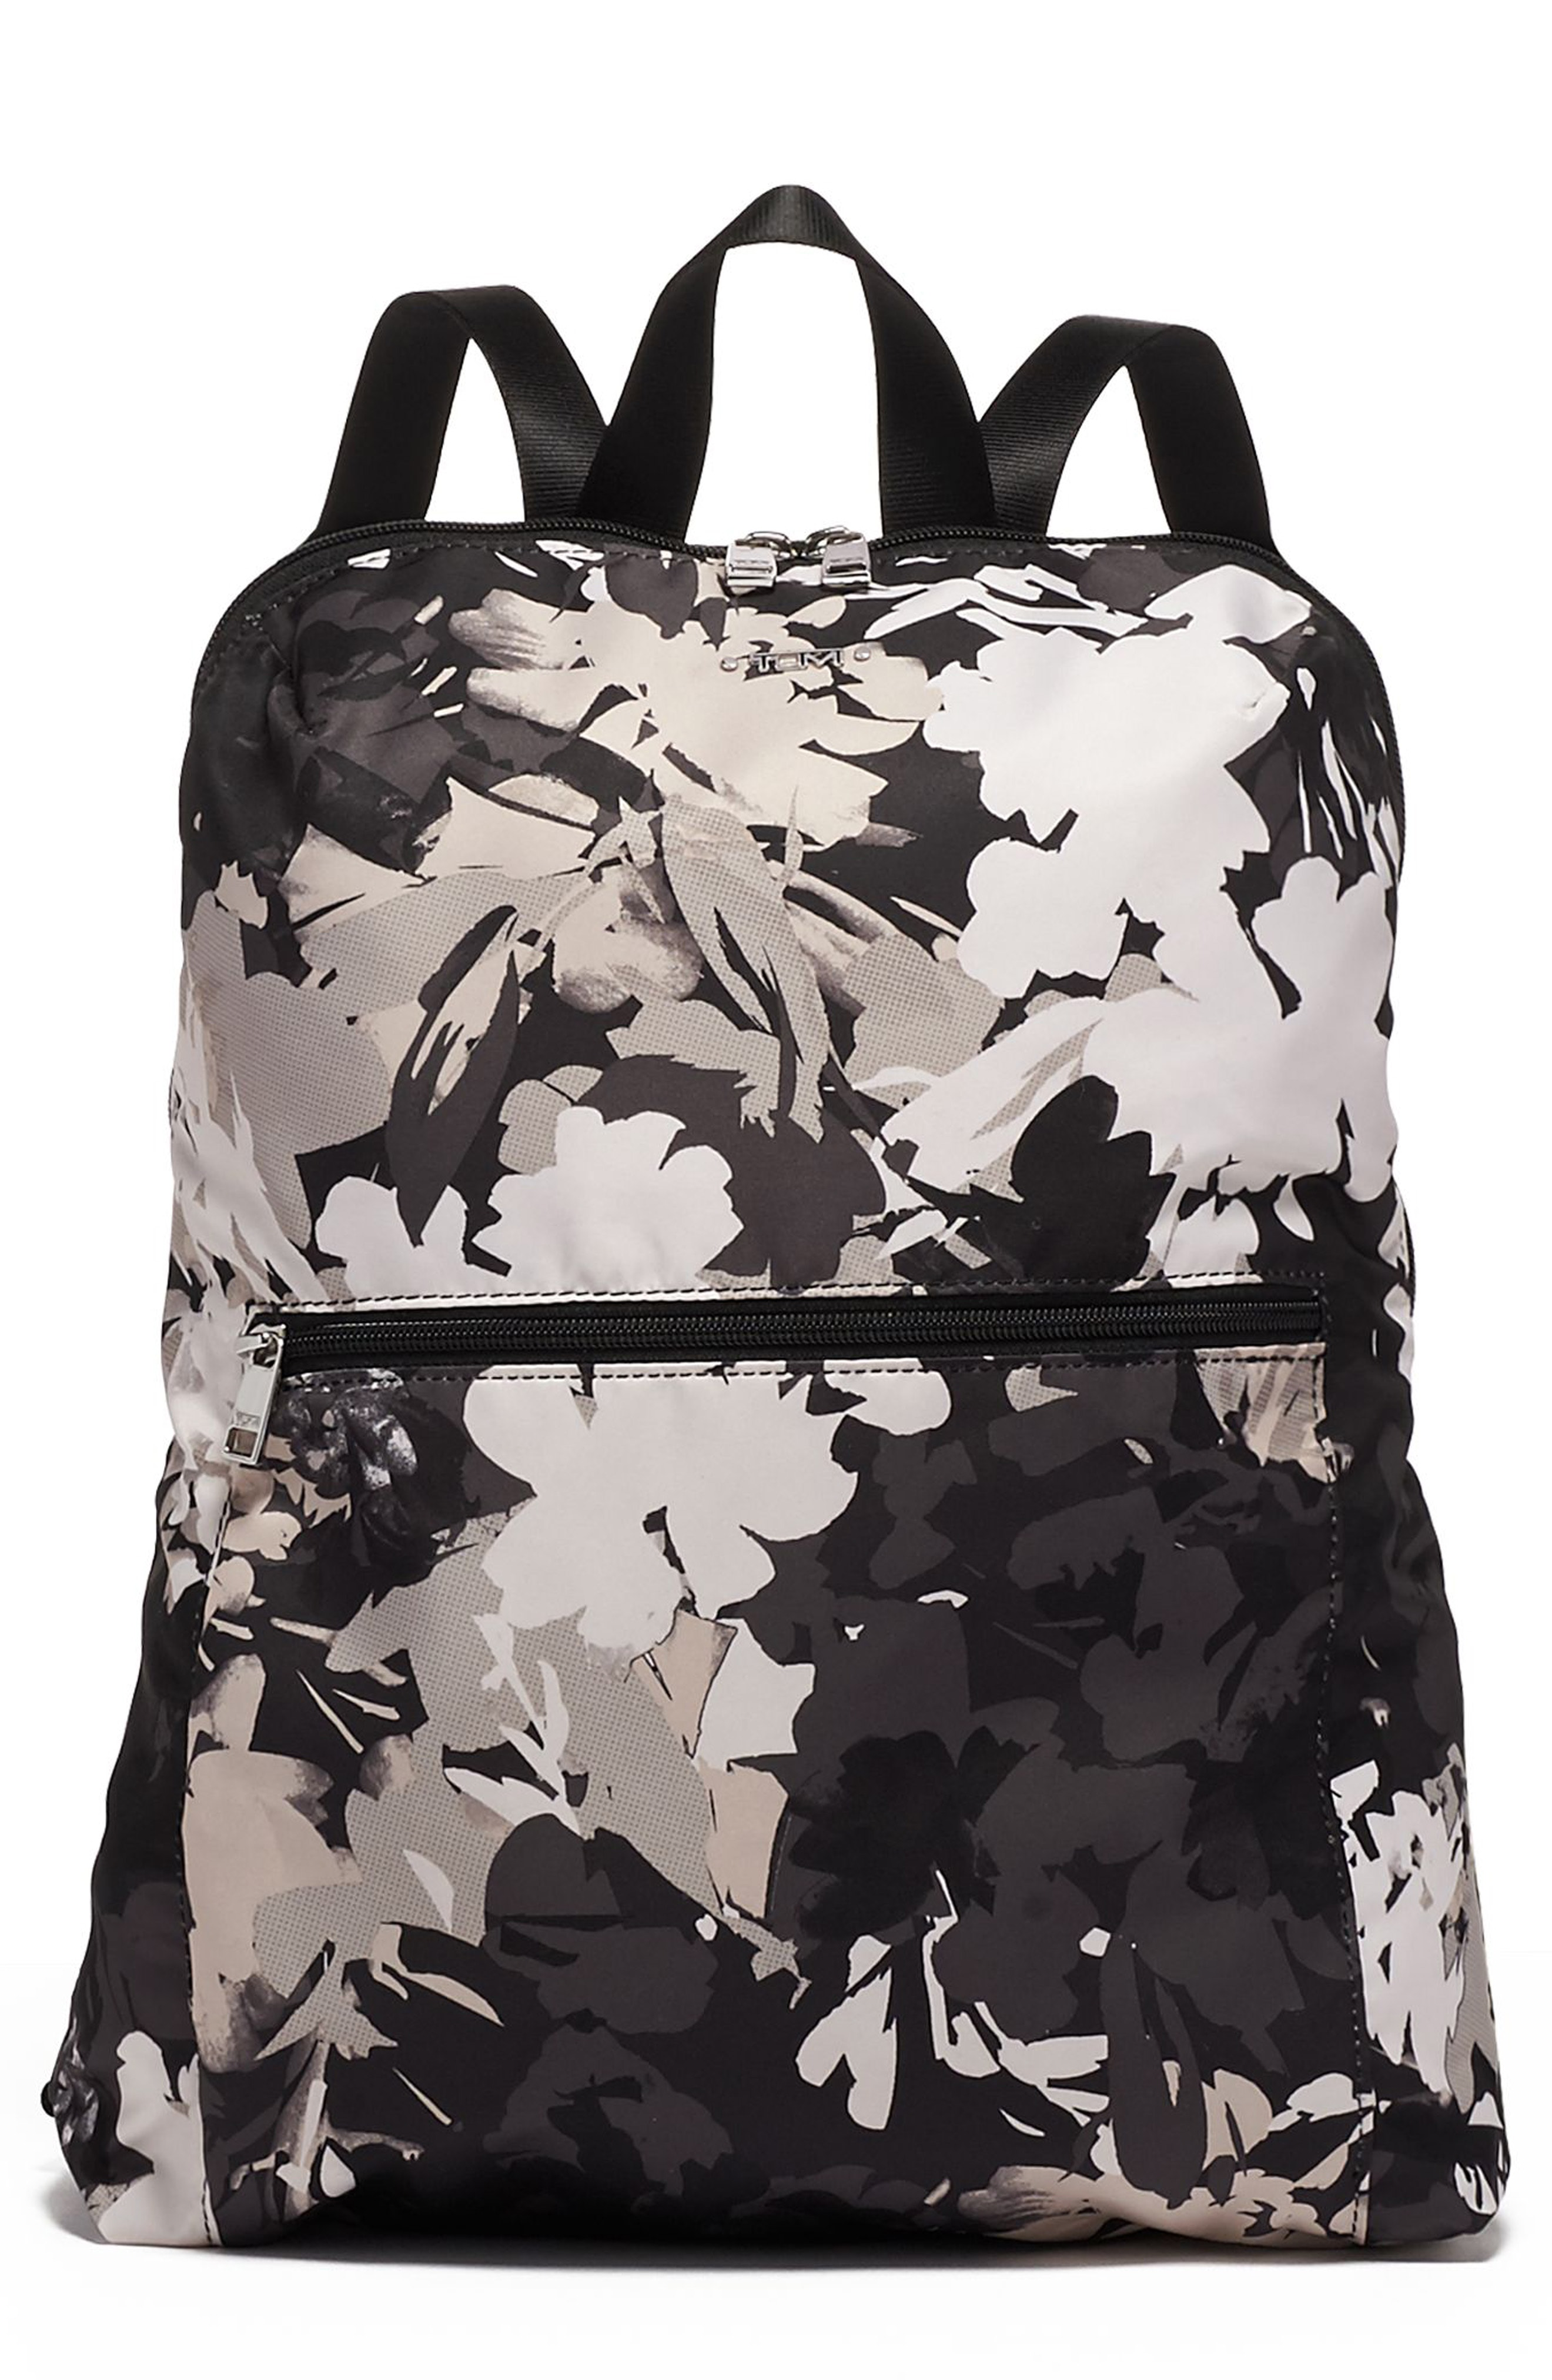 Tumi Voyageur - Just In Case Nylon Travel Backpack - Black In African ...